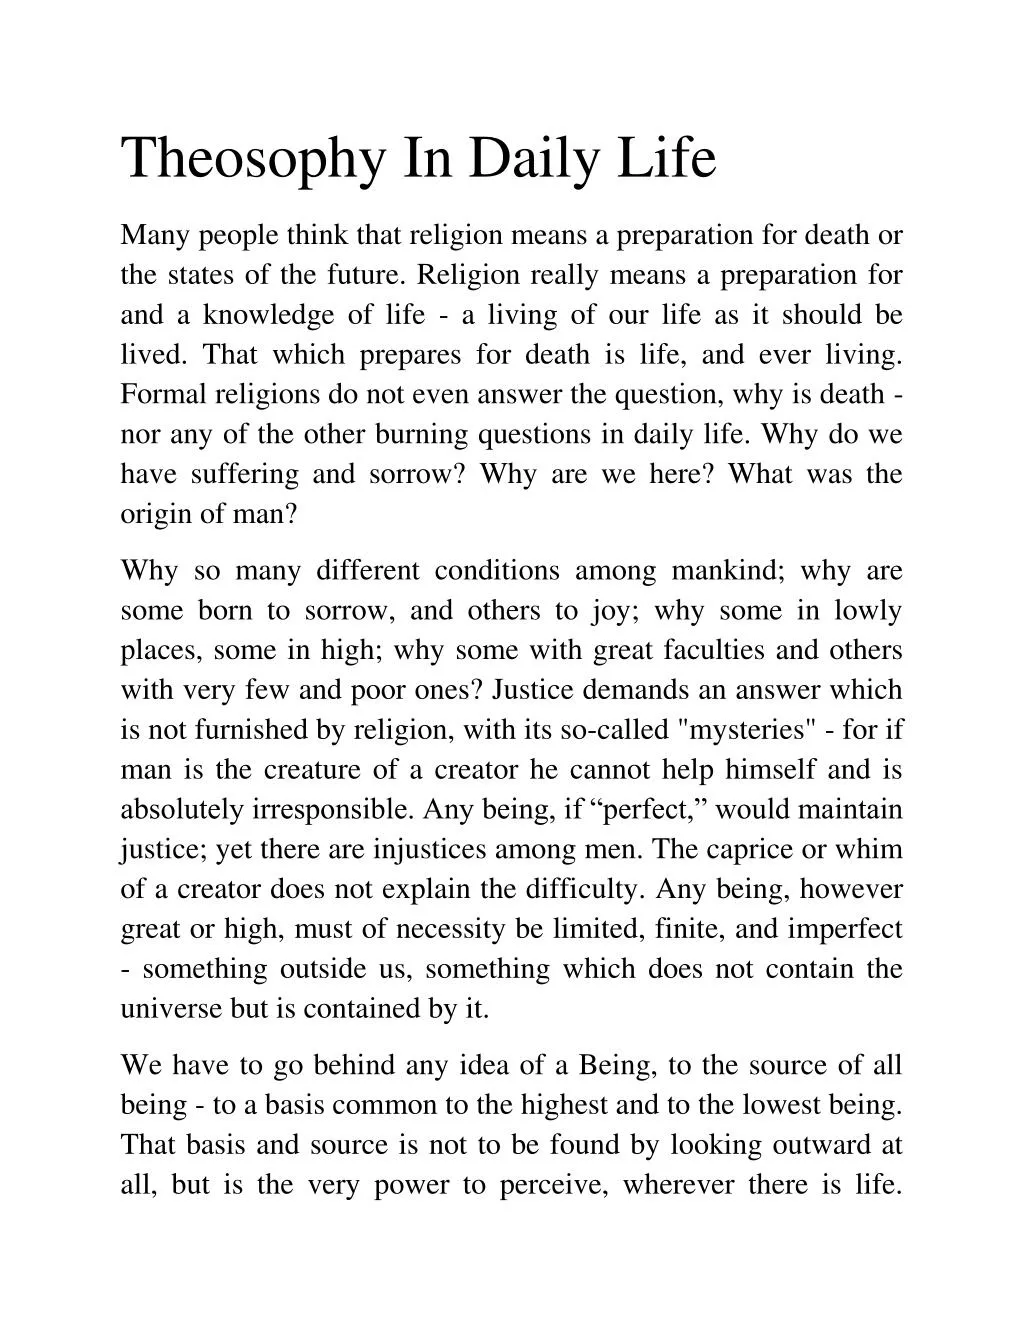 theosophy in daily life